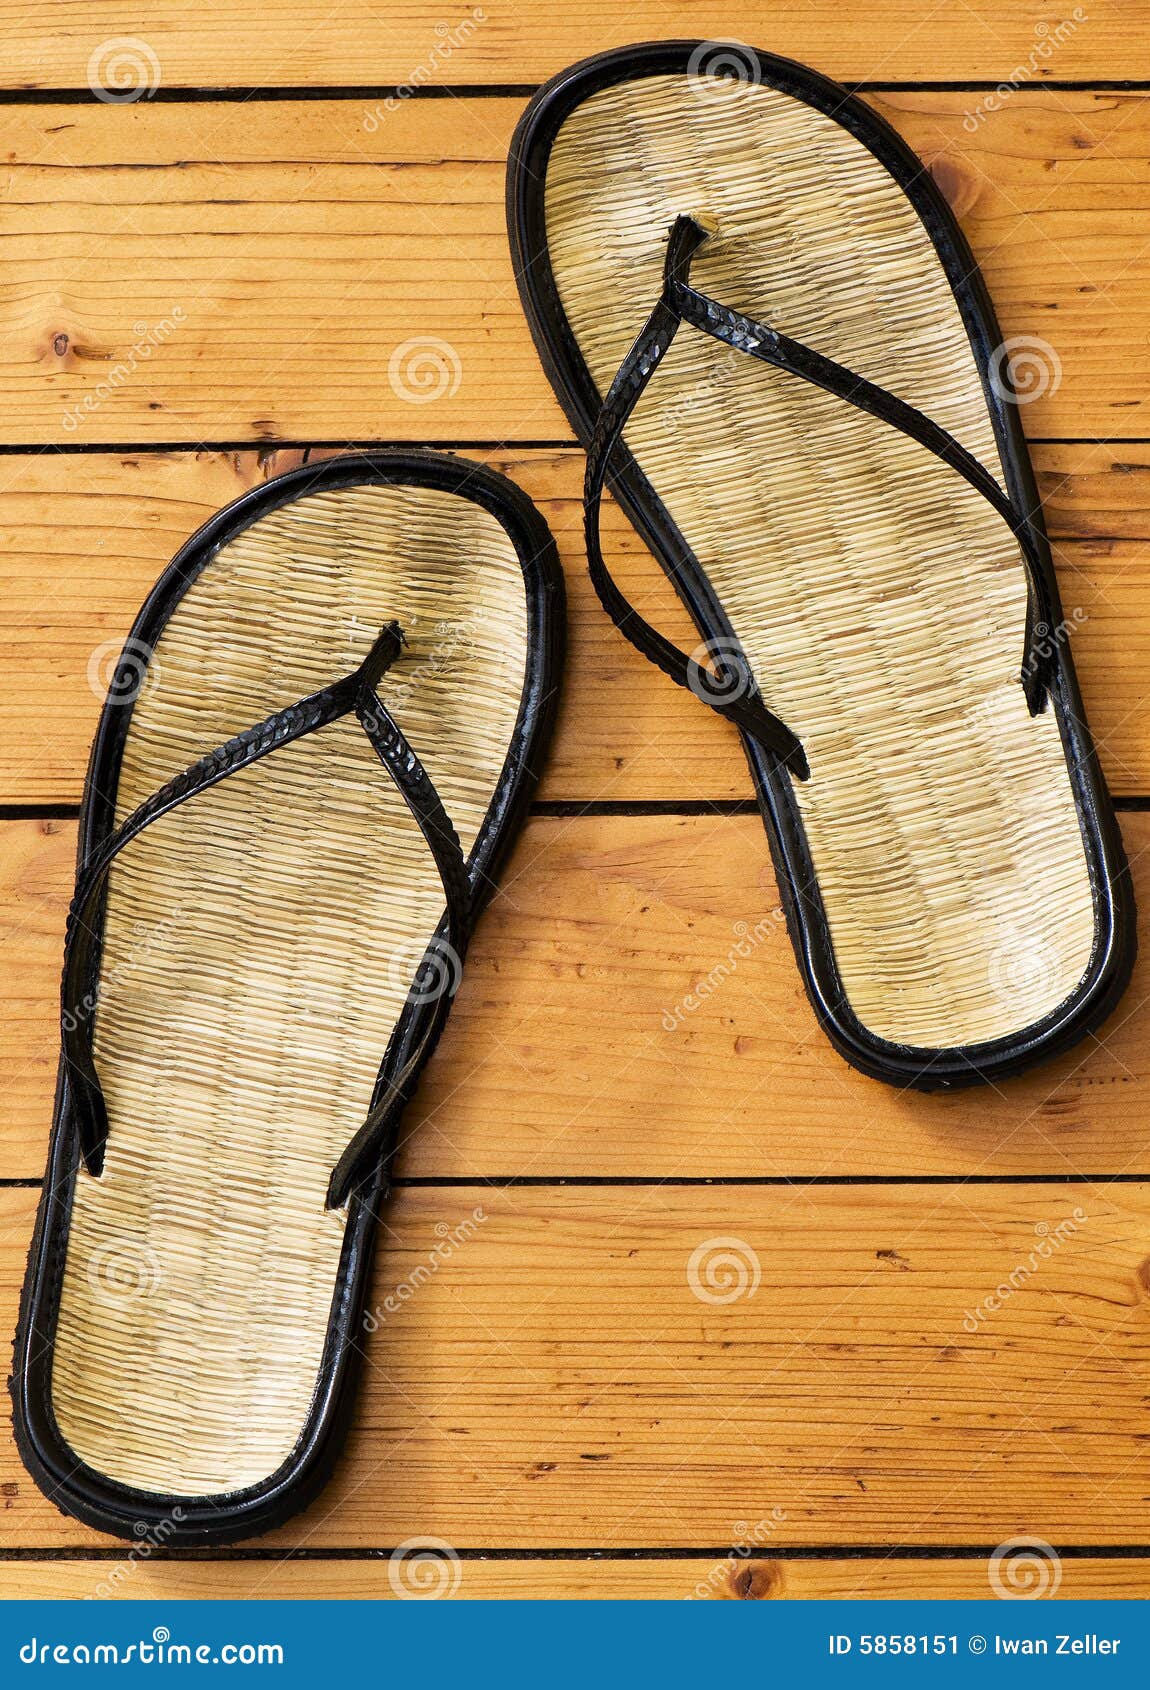 Sandals on wooden floor stock image. Image of color, wood - 5858151